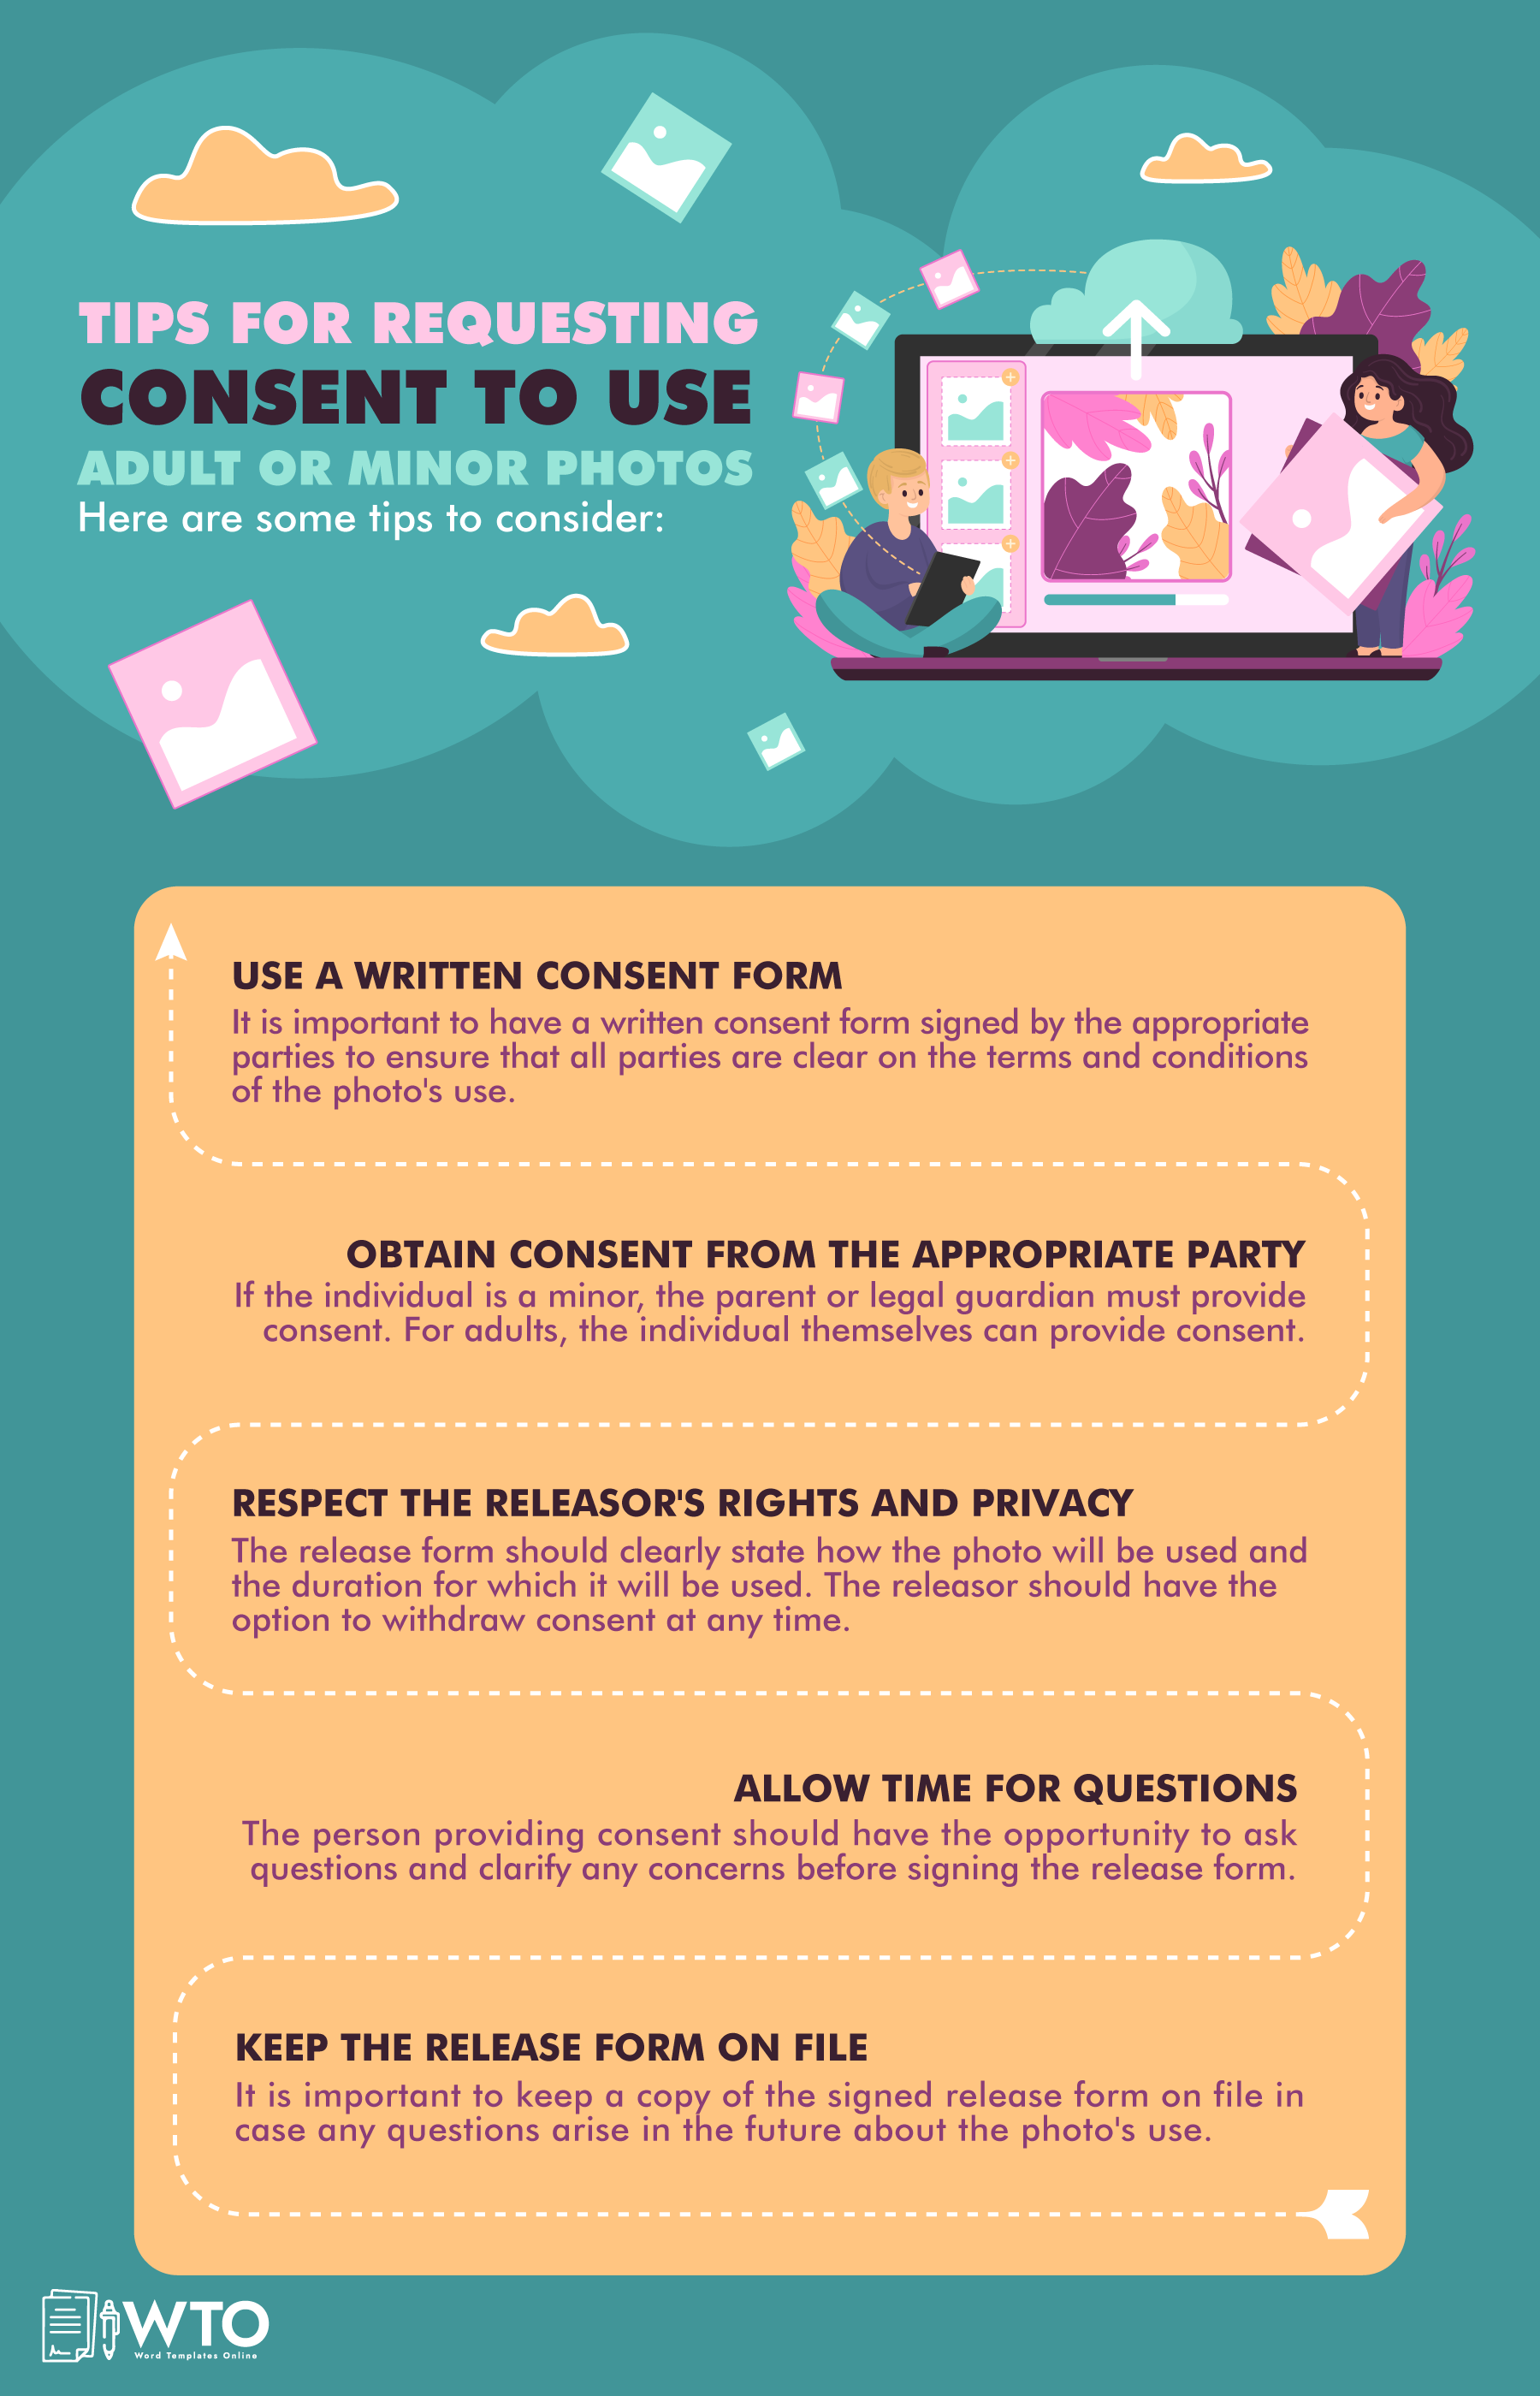 This infographic is about tips for requesting consent to use photos.